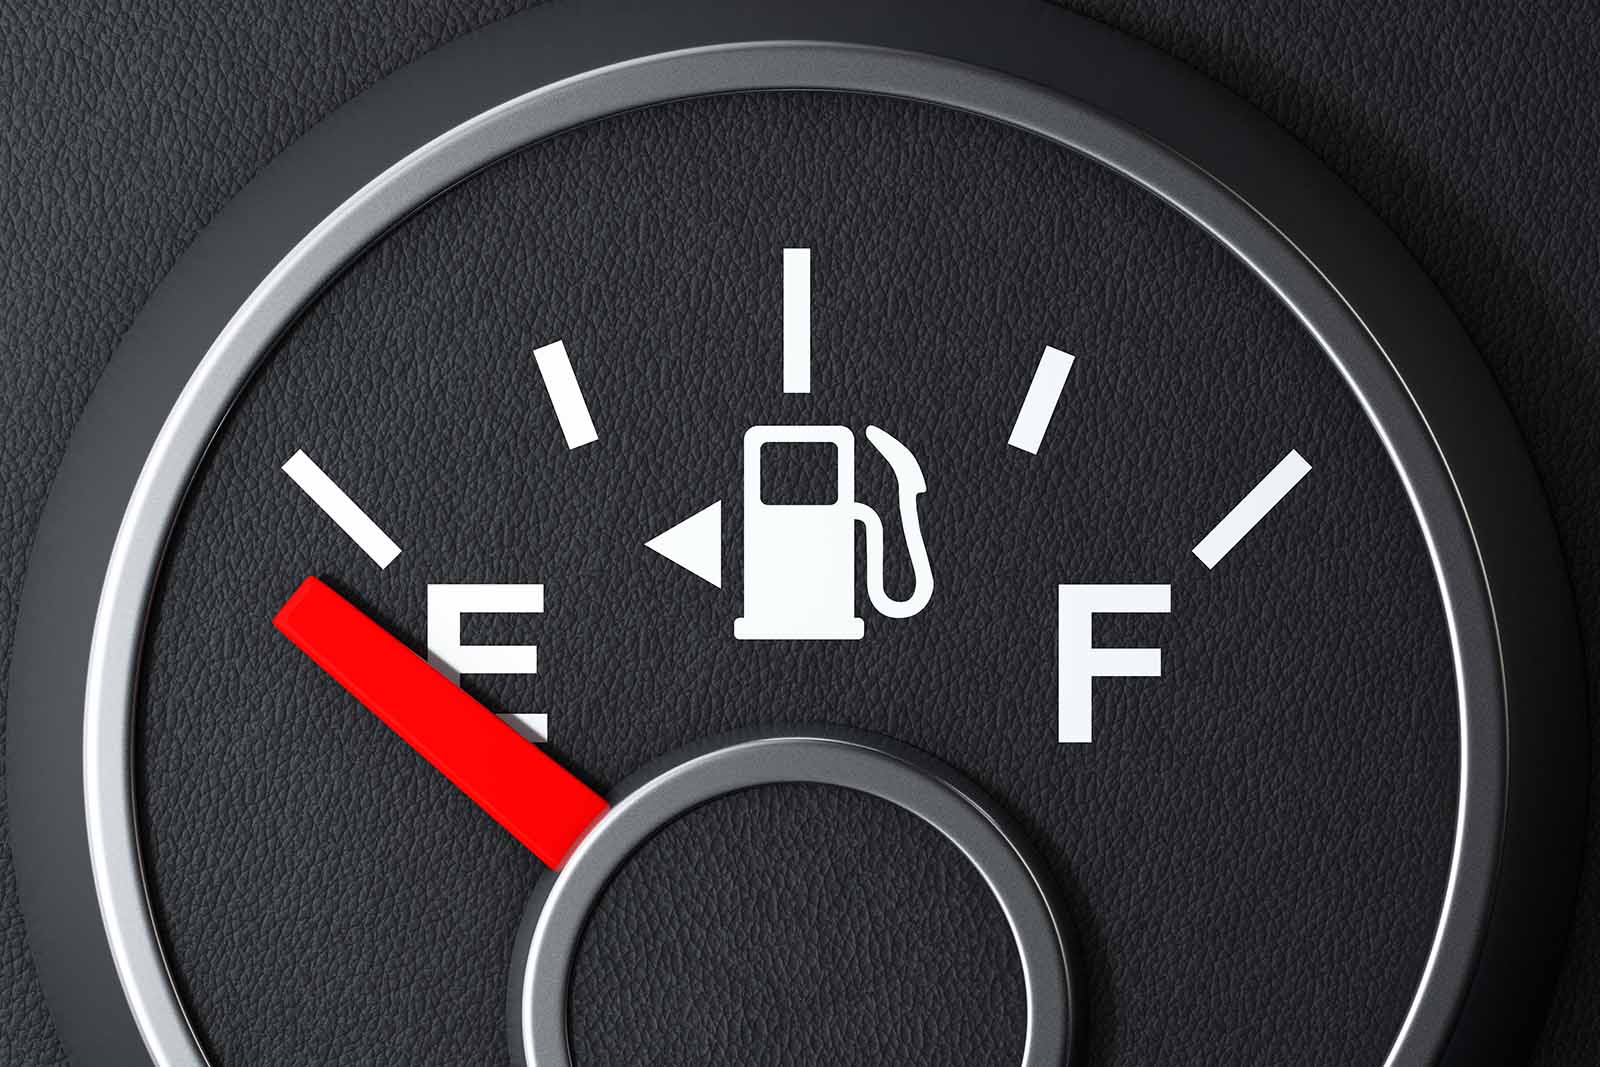 Don't panic – Follow these six steps when your vehicle runs out of gas